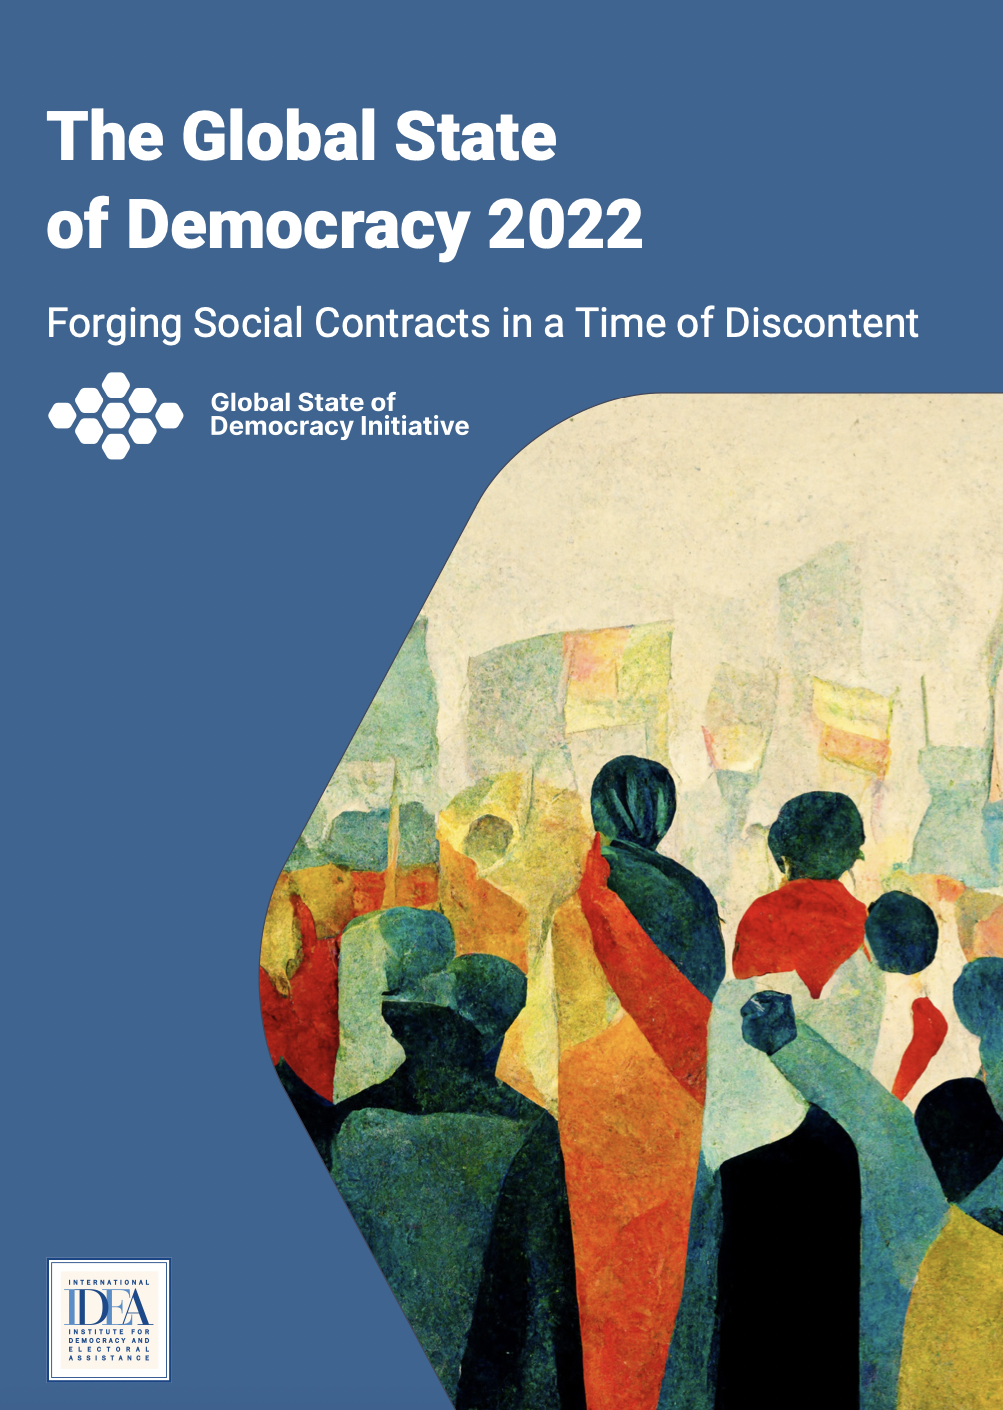 Global State of Democracy 2022: Forging Social Contracts in a Time of Discontent